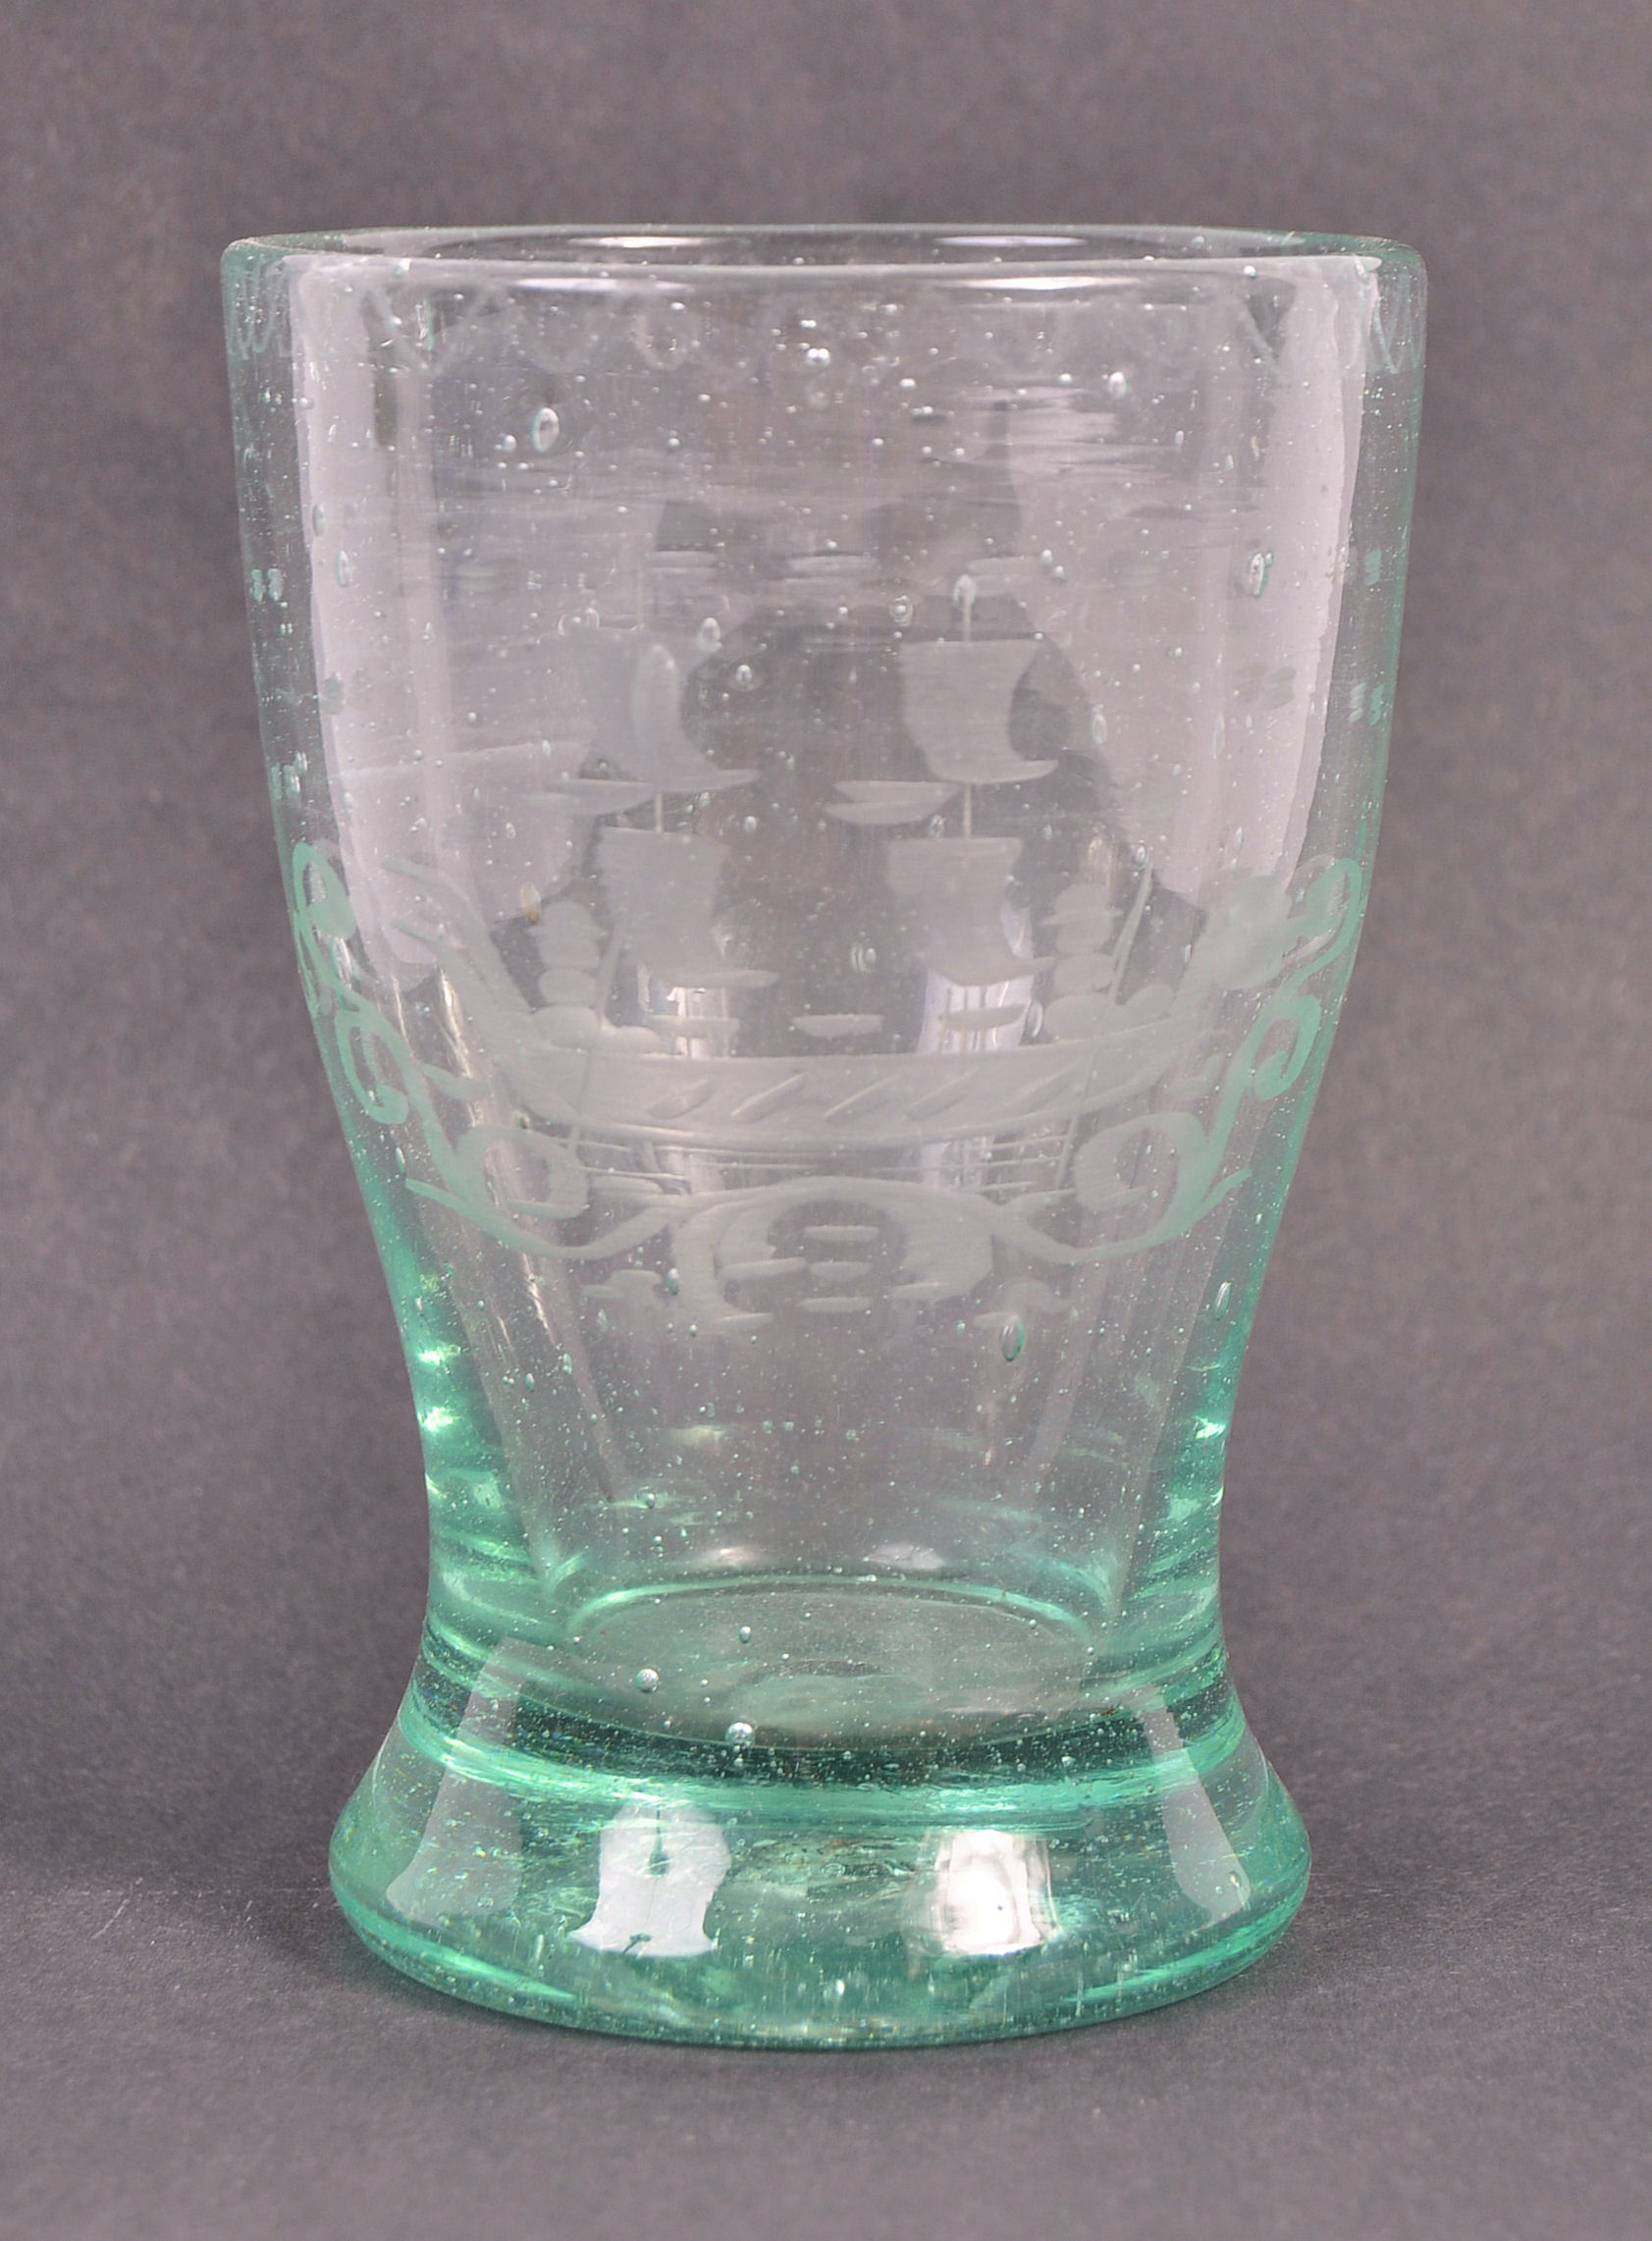 18TH CENTURY GEORGIAN ENGLISH DRINKING GLASS WITH BOAT DECORATION